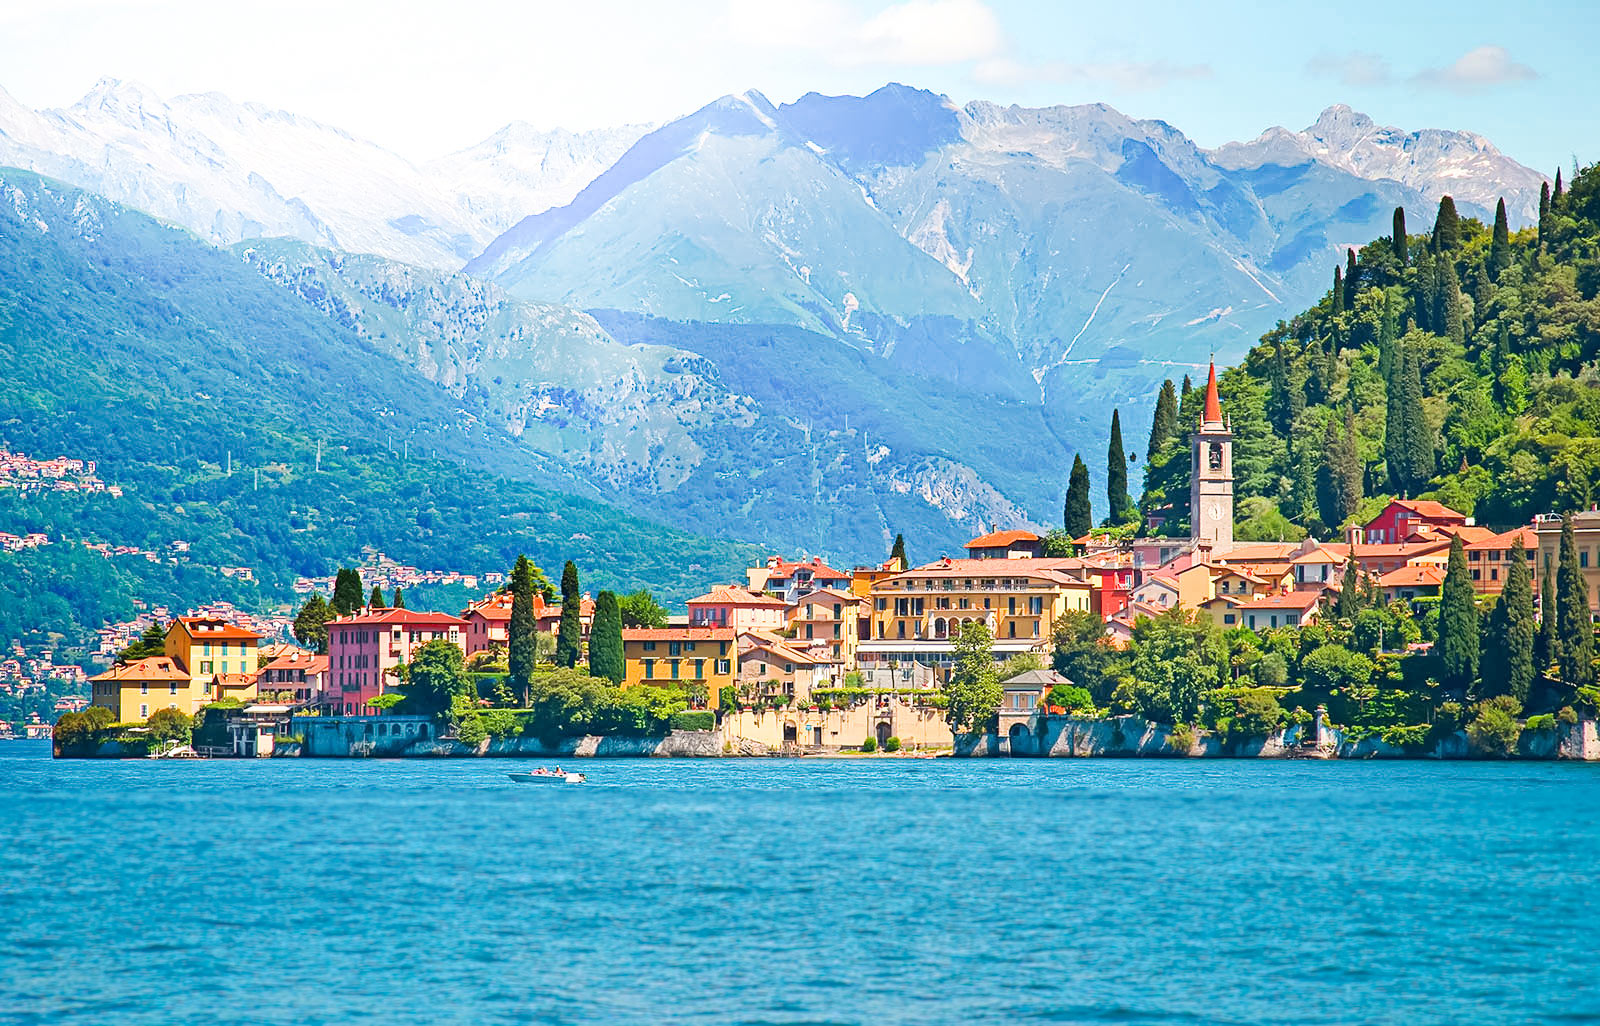 Lake Como - beautiful places in Italy